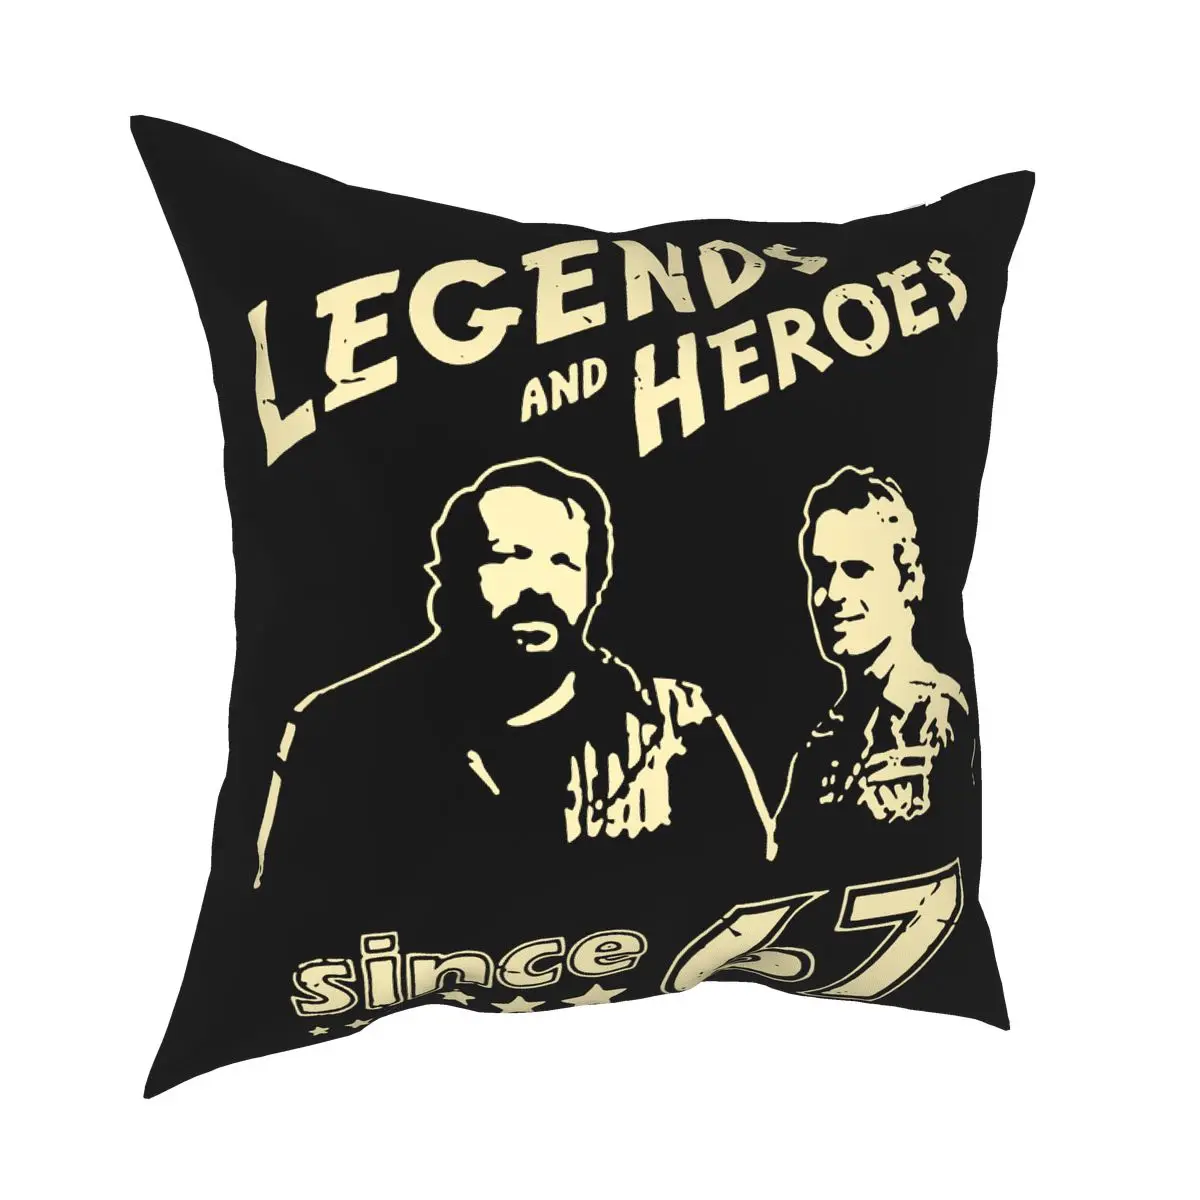 

Bud Spencer Legends And Hero Since 67 Pillow Case Home Decor Terence Hill Cushion Cover Throw Pillow for Sofa Polyester